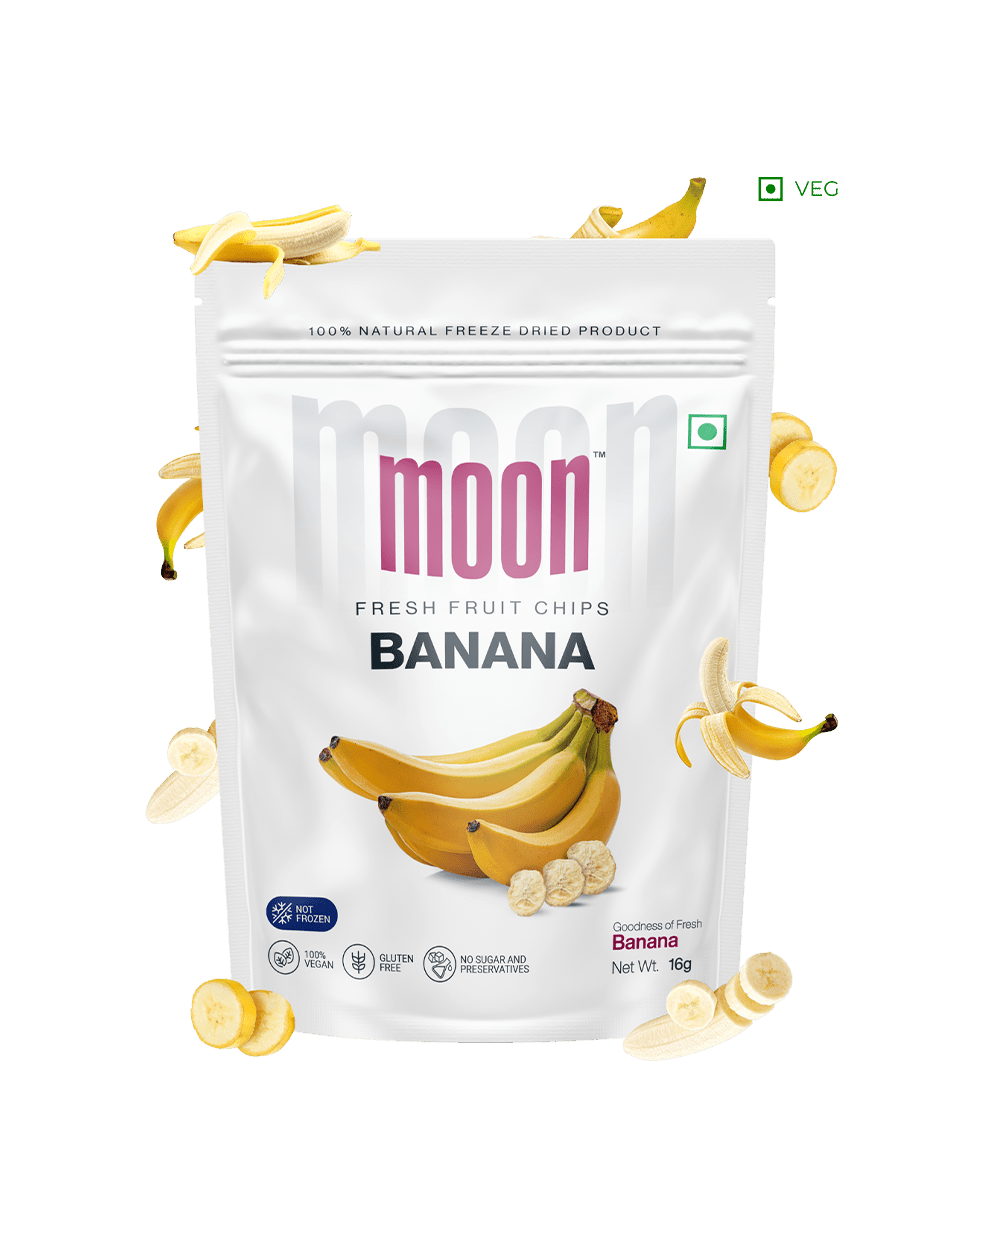 A bag of Themoonstoreindia's Moon Freeze Dried Banana on a white background.